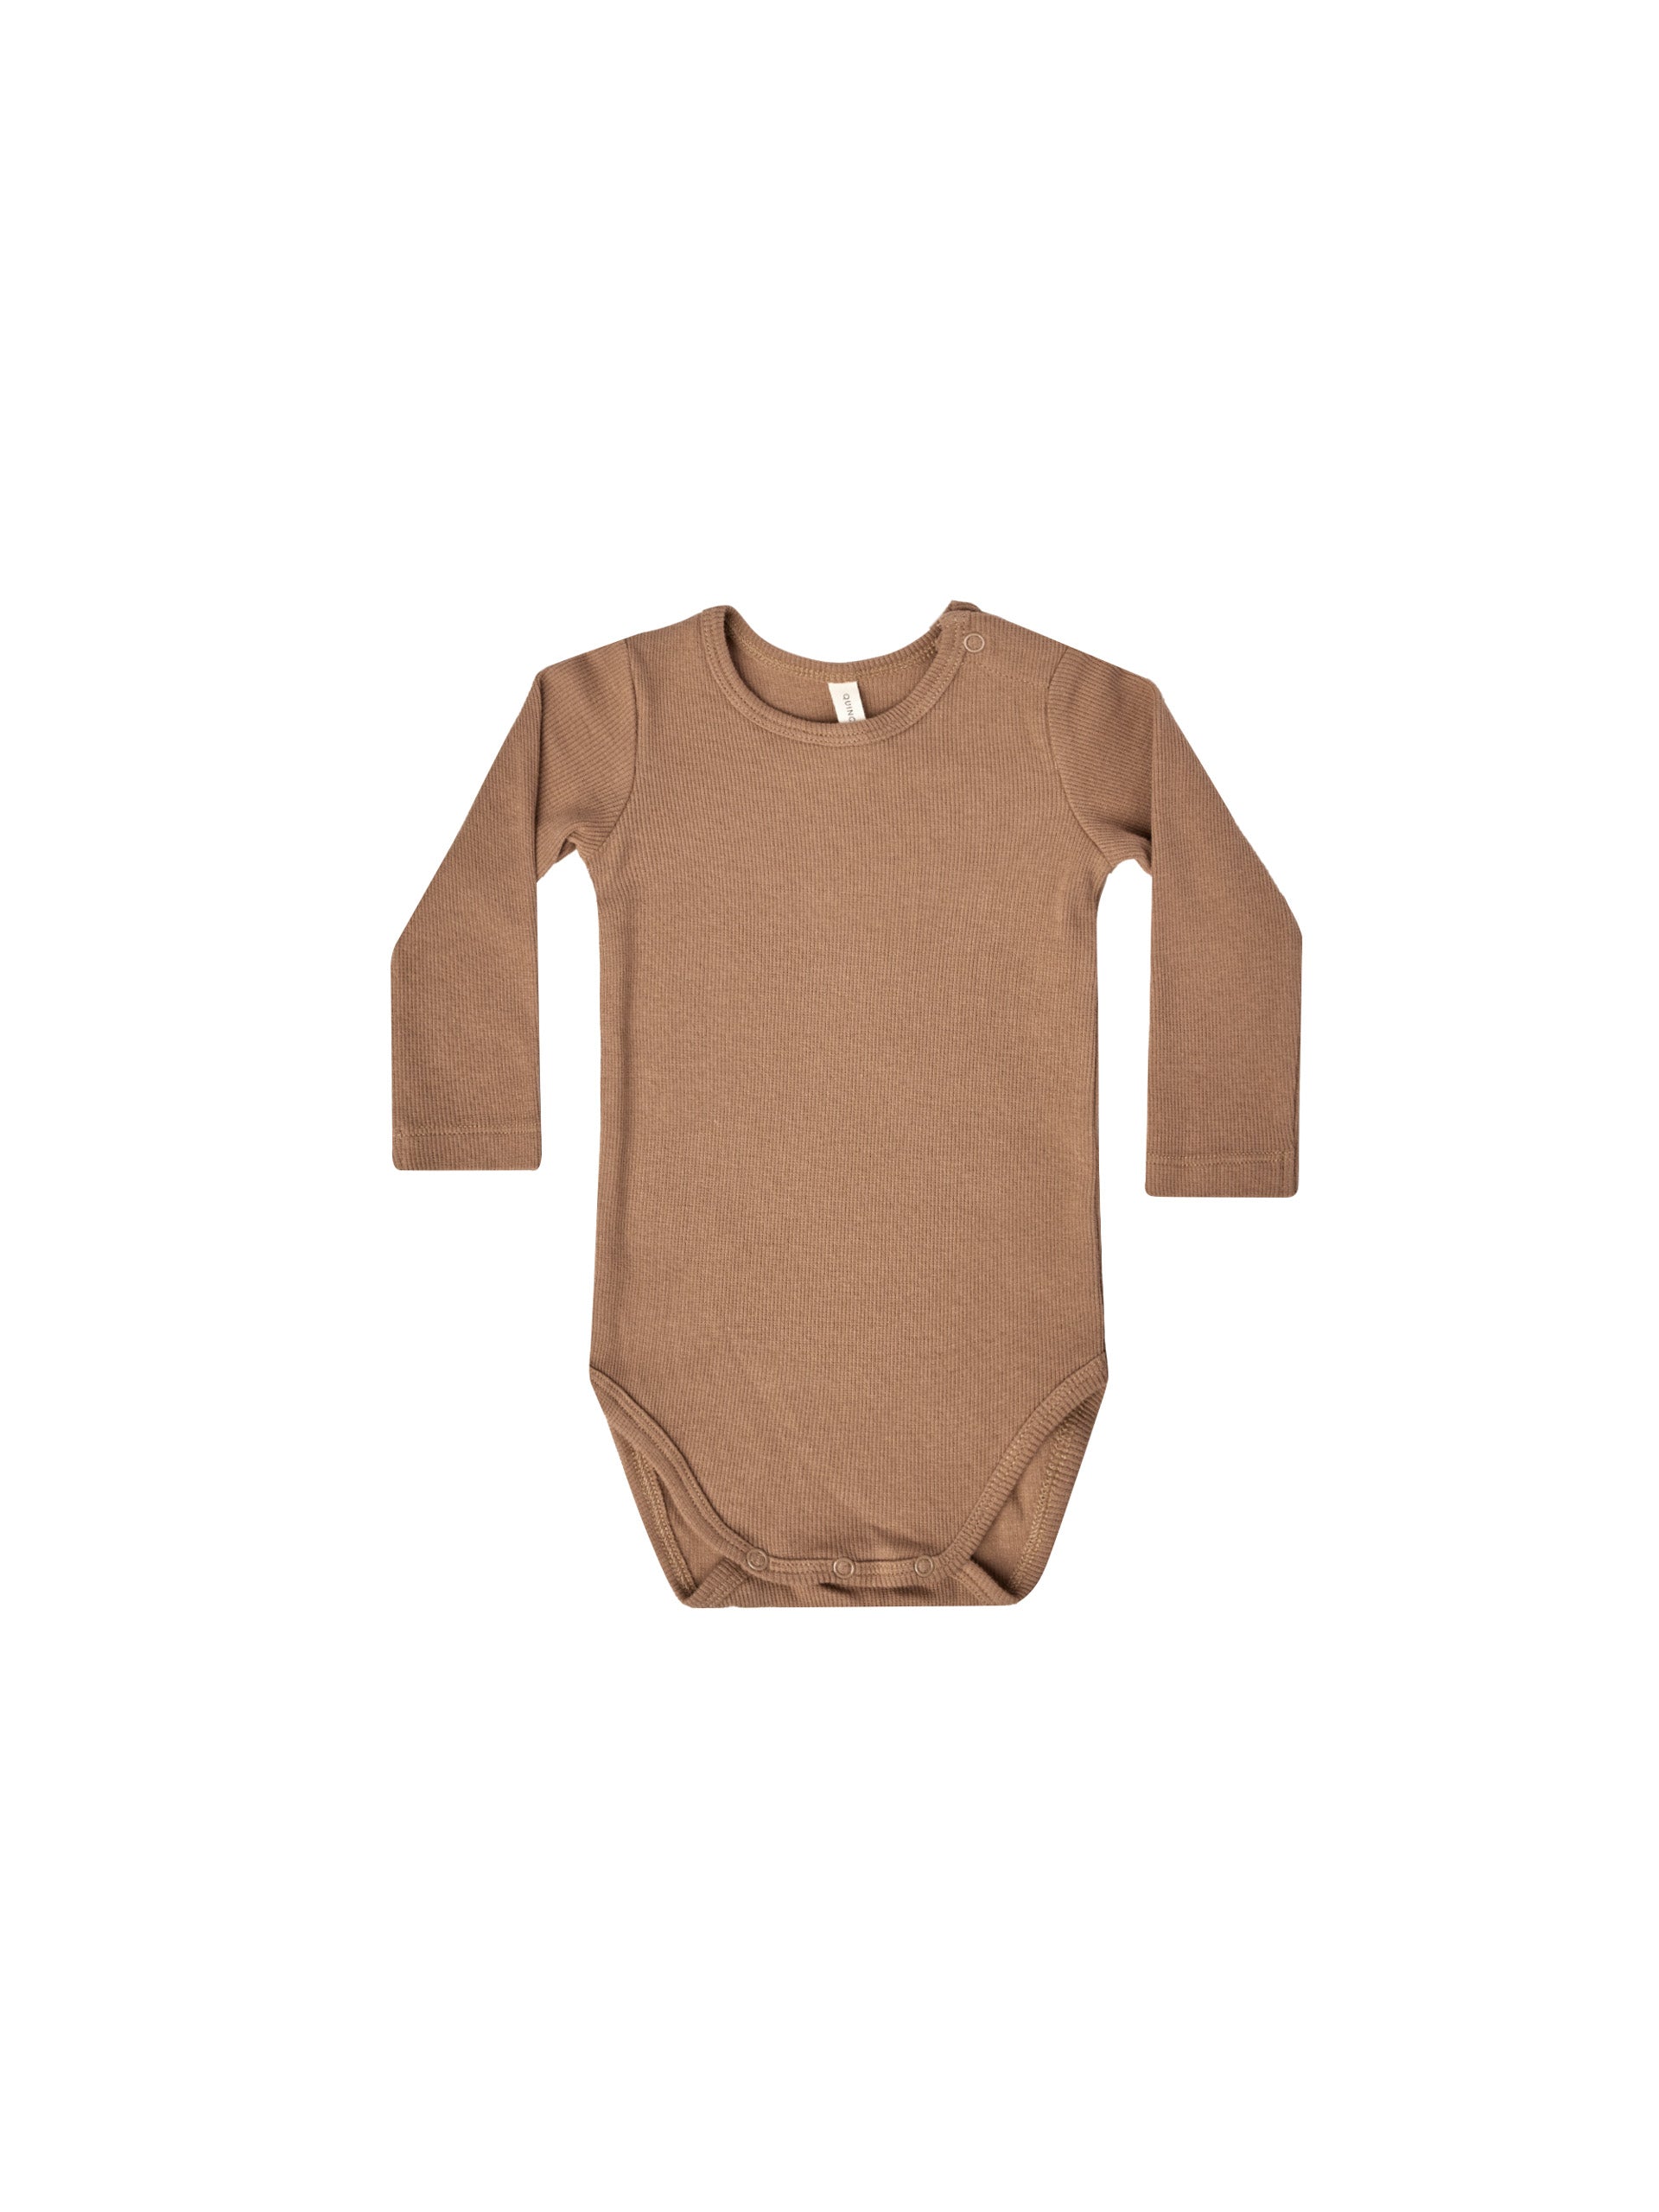 RIBBED BODYSUIT | CLAY - LAST ONE 6/12M